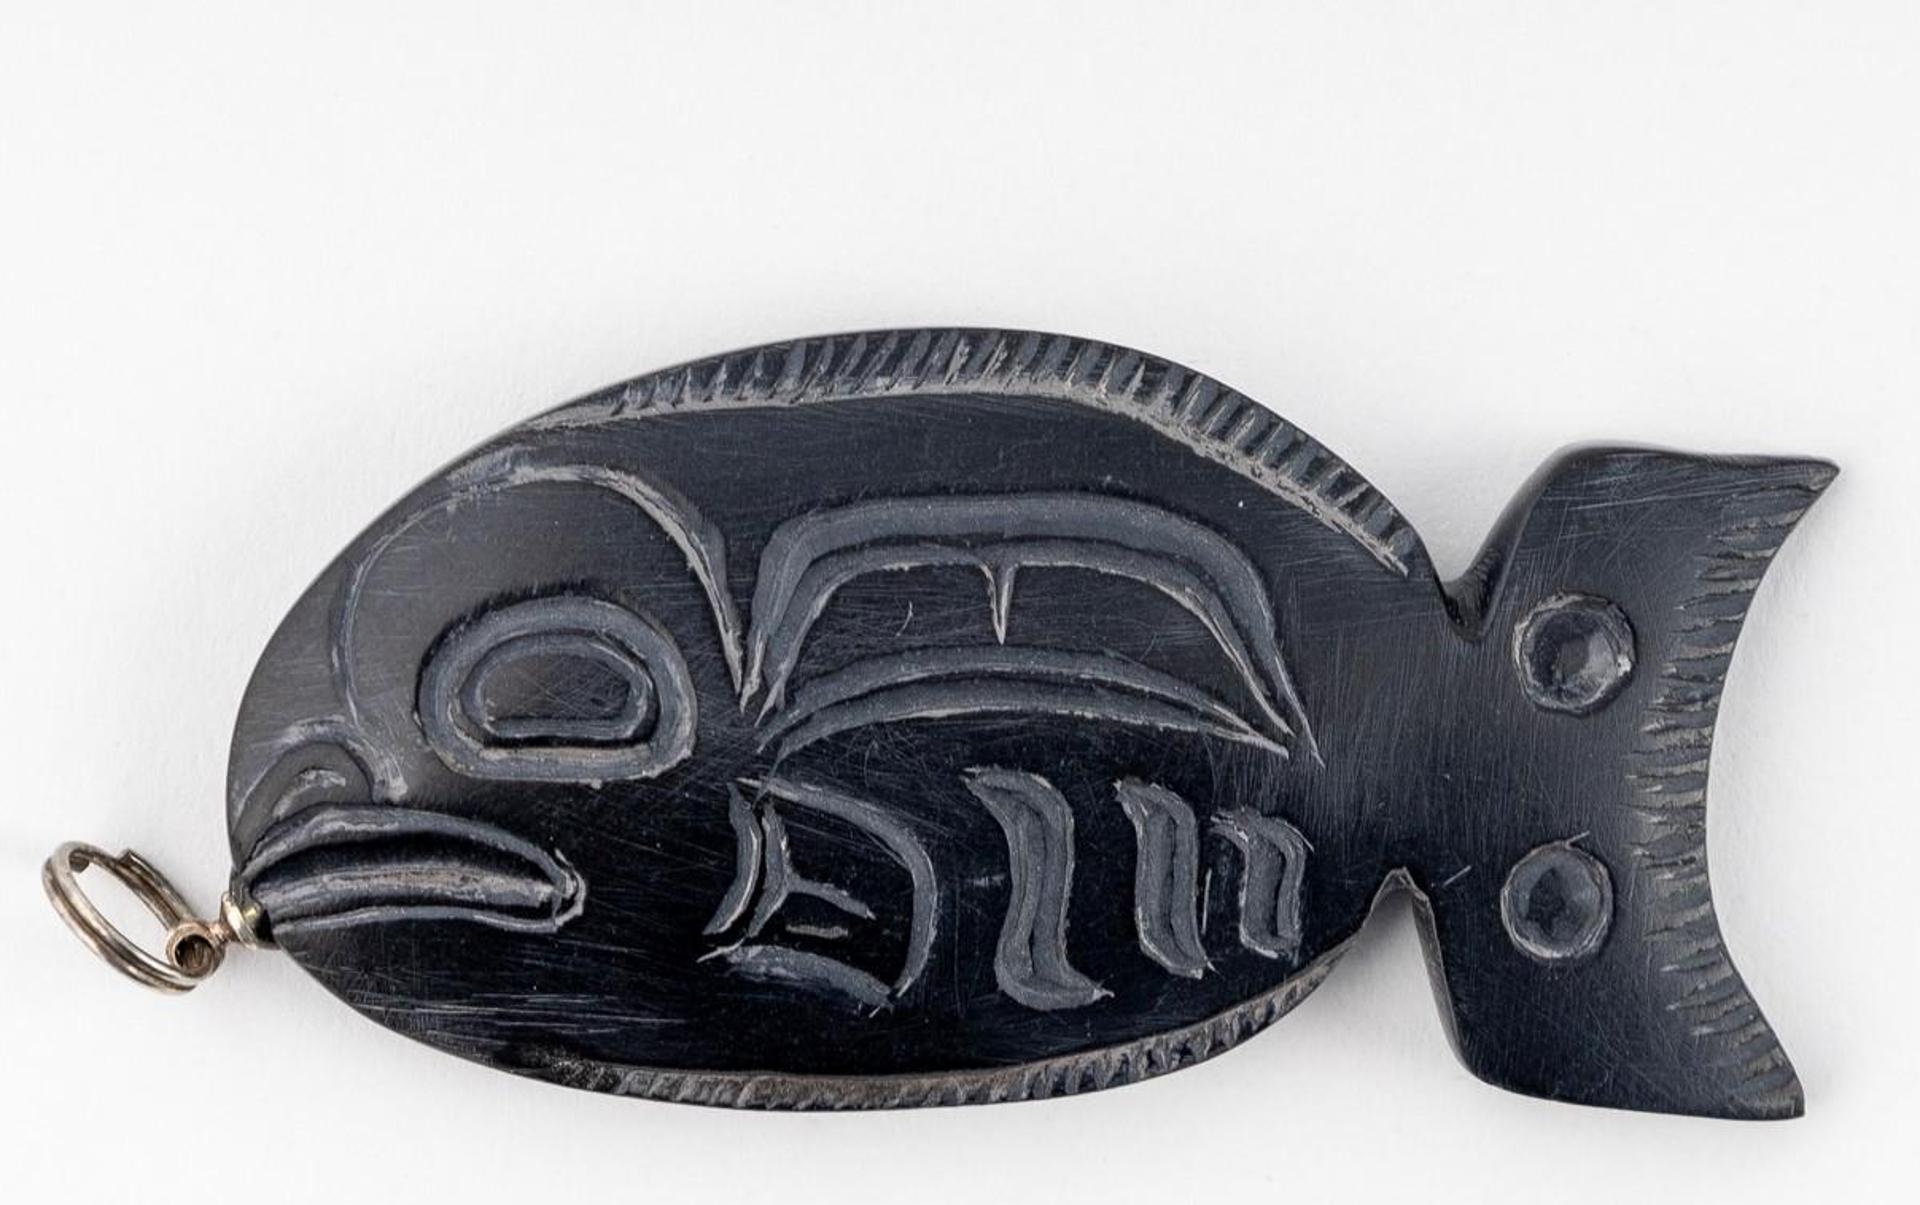 Gryn White - a carved argillite pendant in the form of a Sculpin